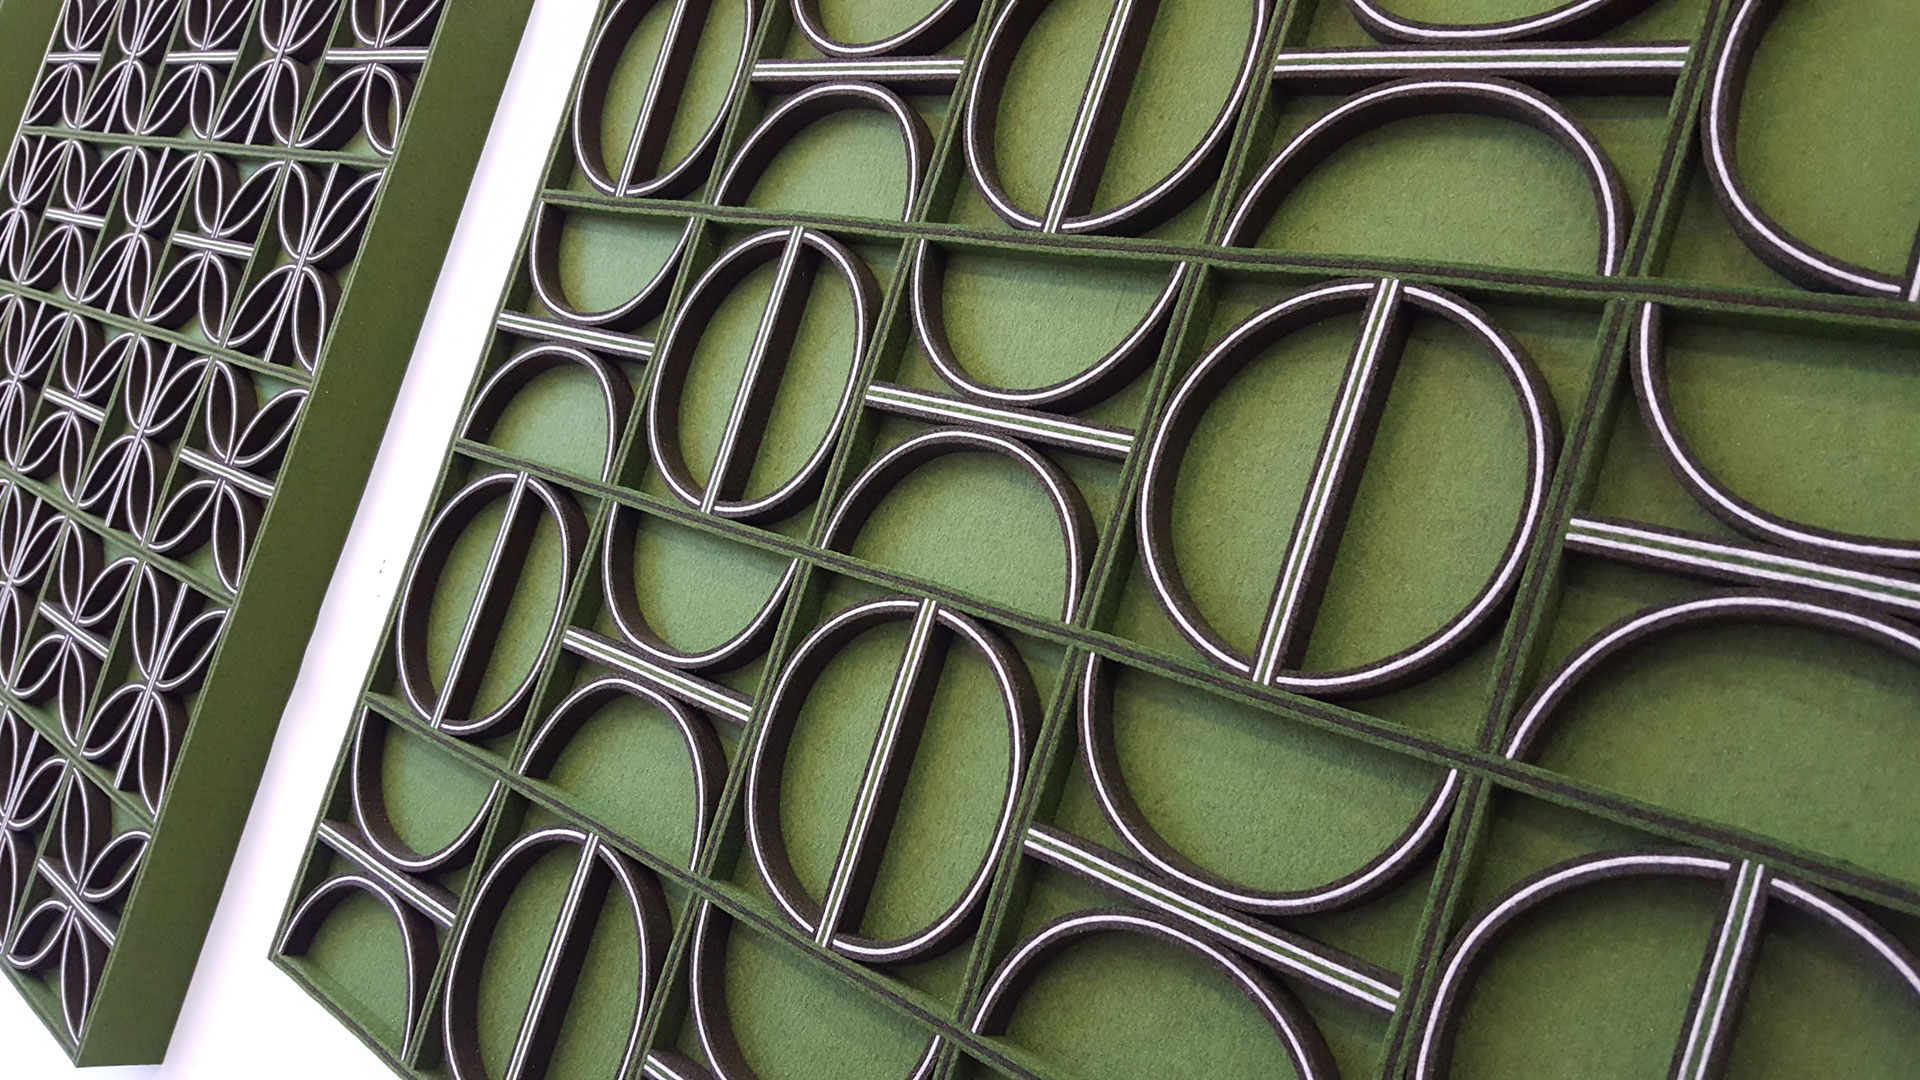 Closeup of a green felt wall panel with circle, half circle and straight lines creating a modern pattern with brown and white accents